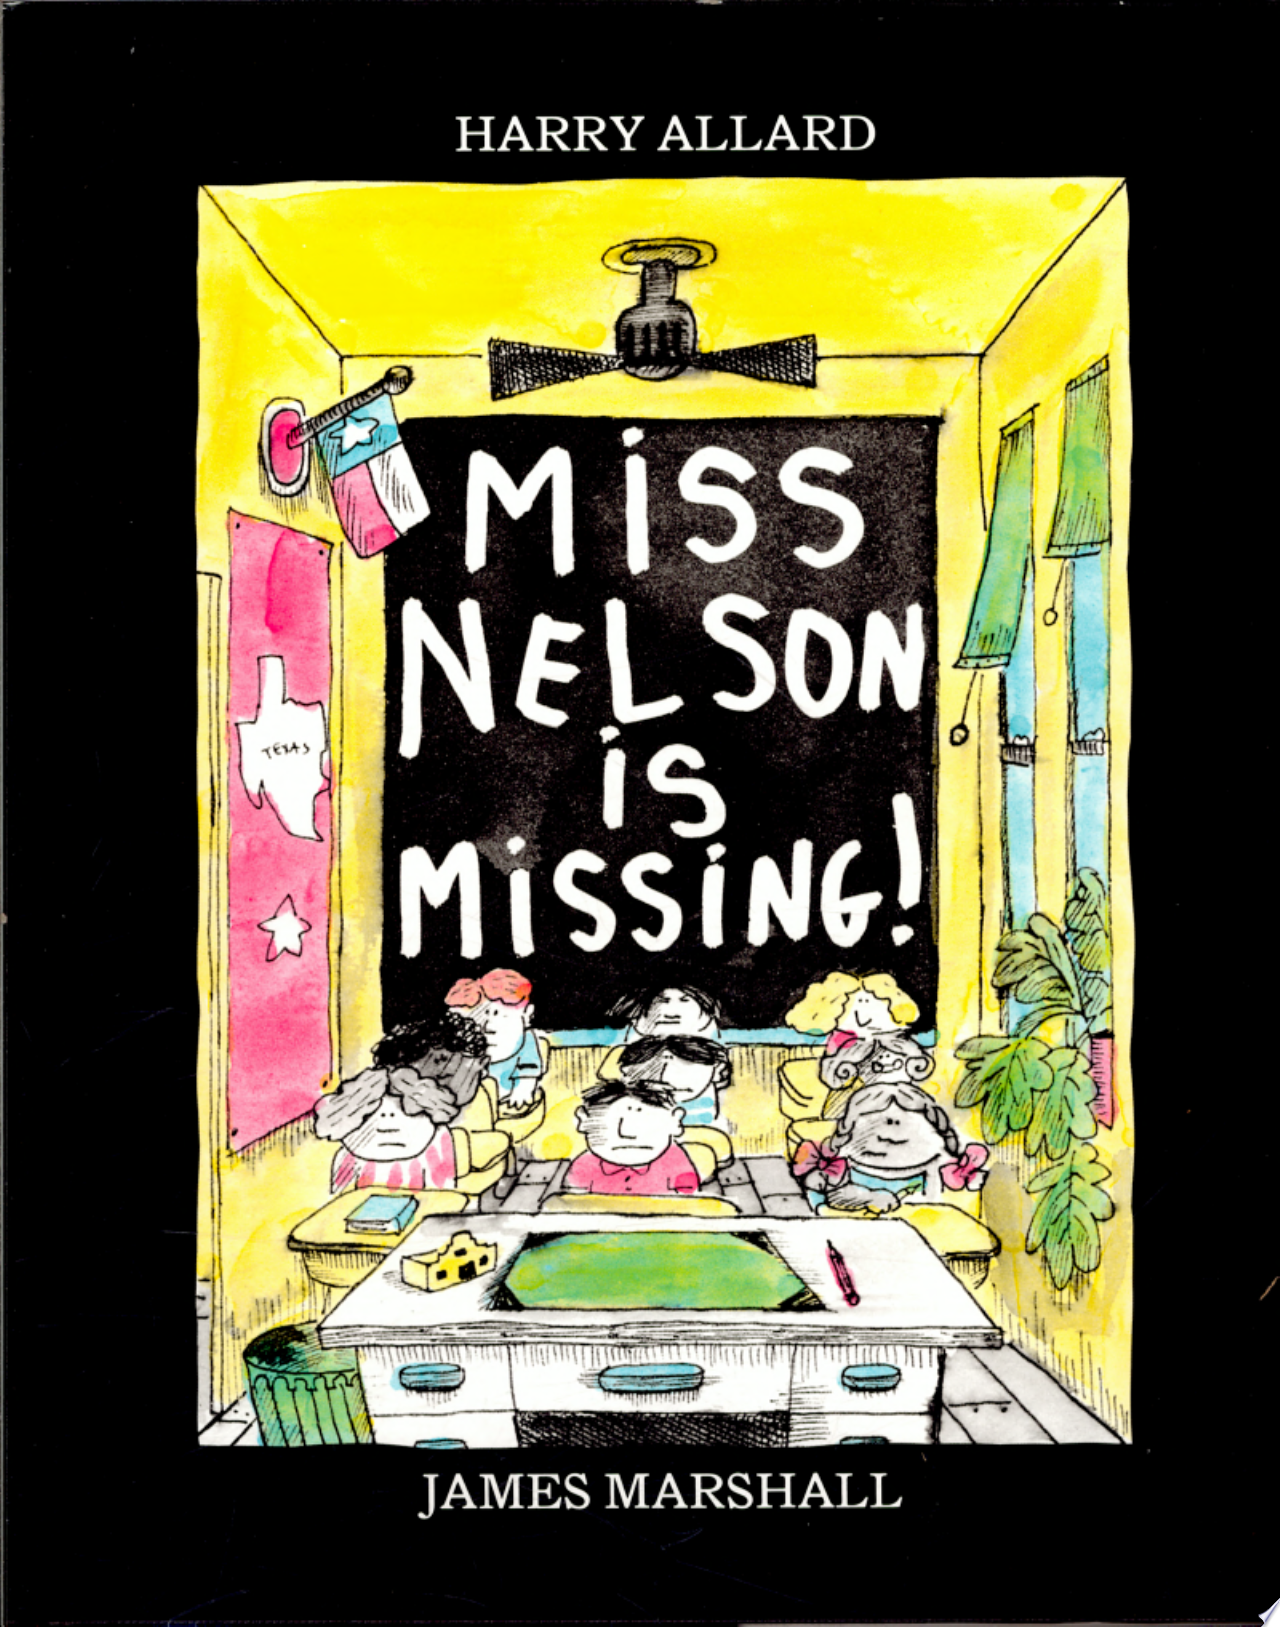 Image for "Miss Nelson is Missing!"